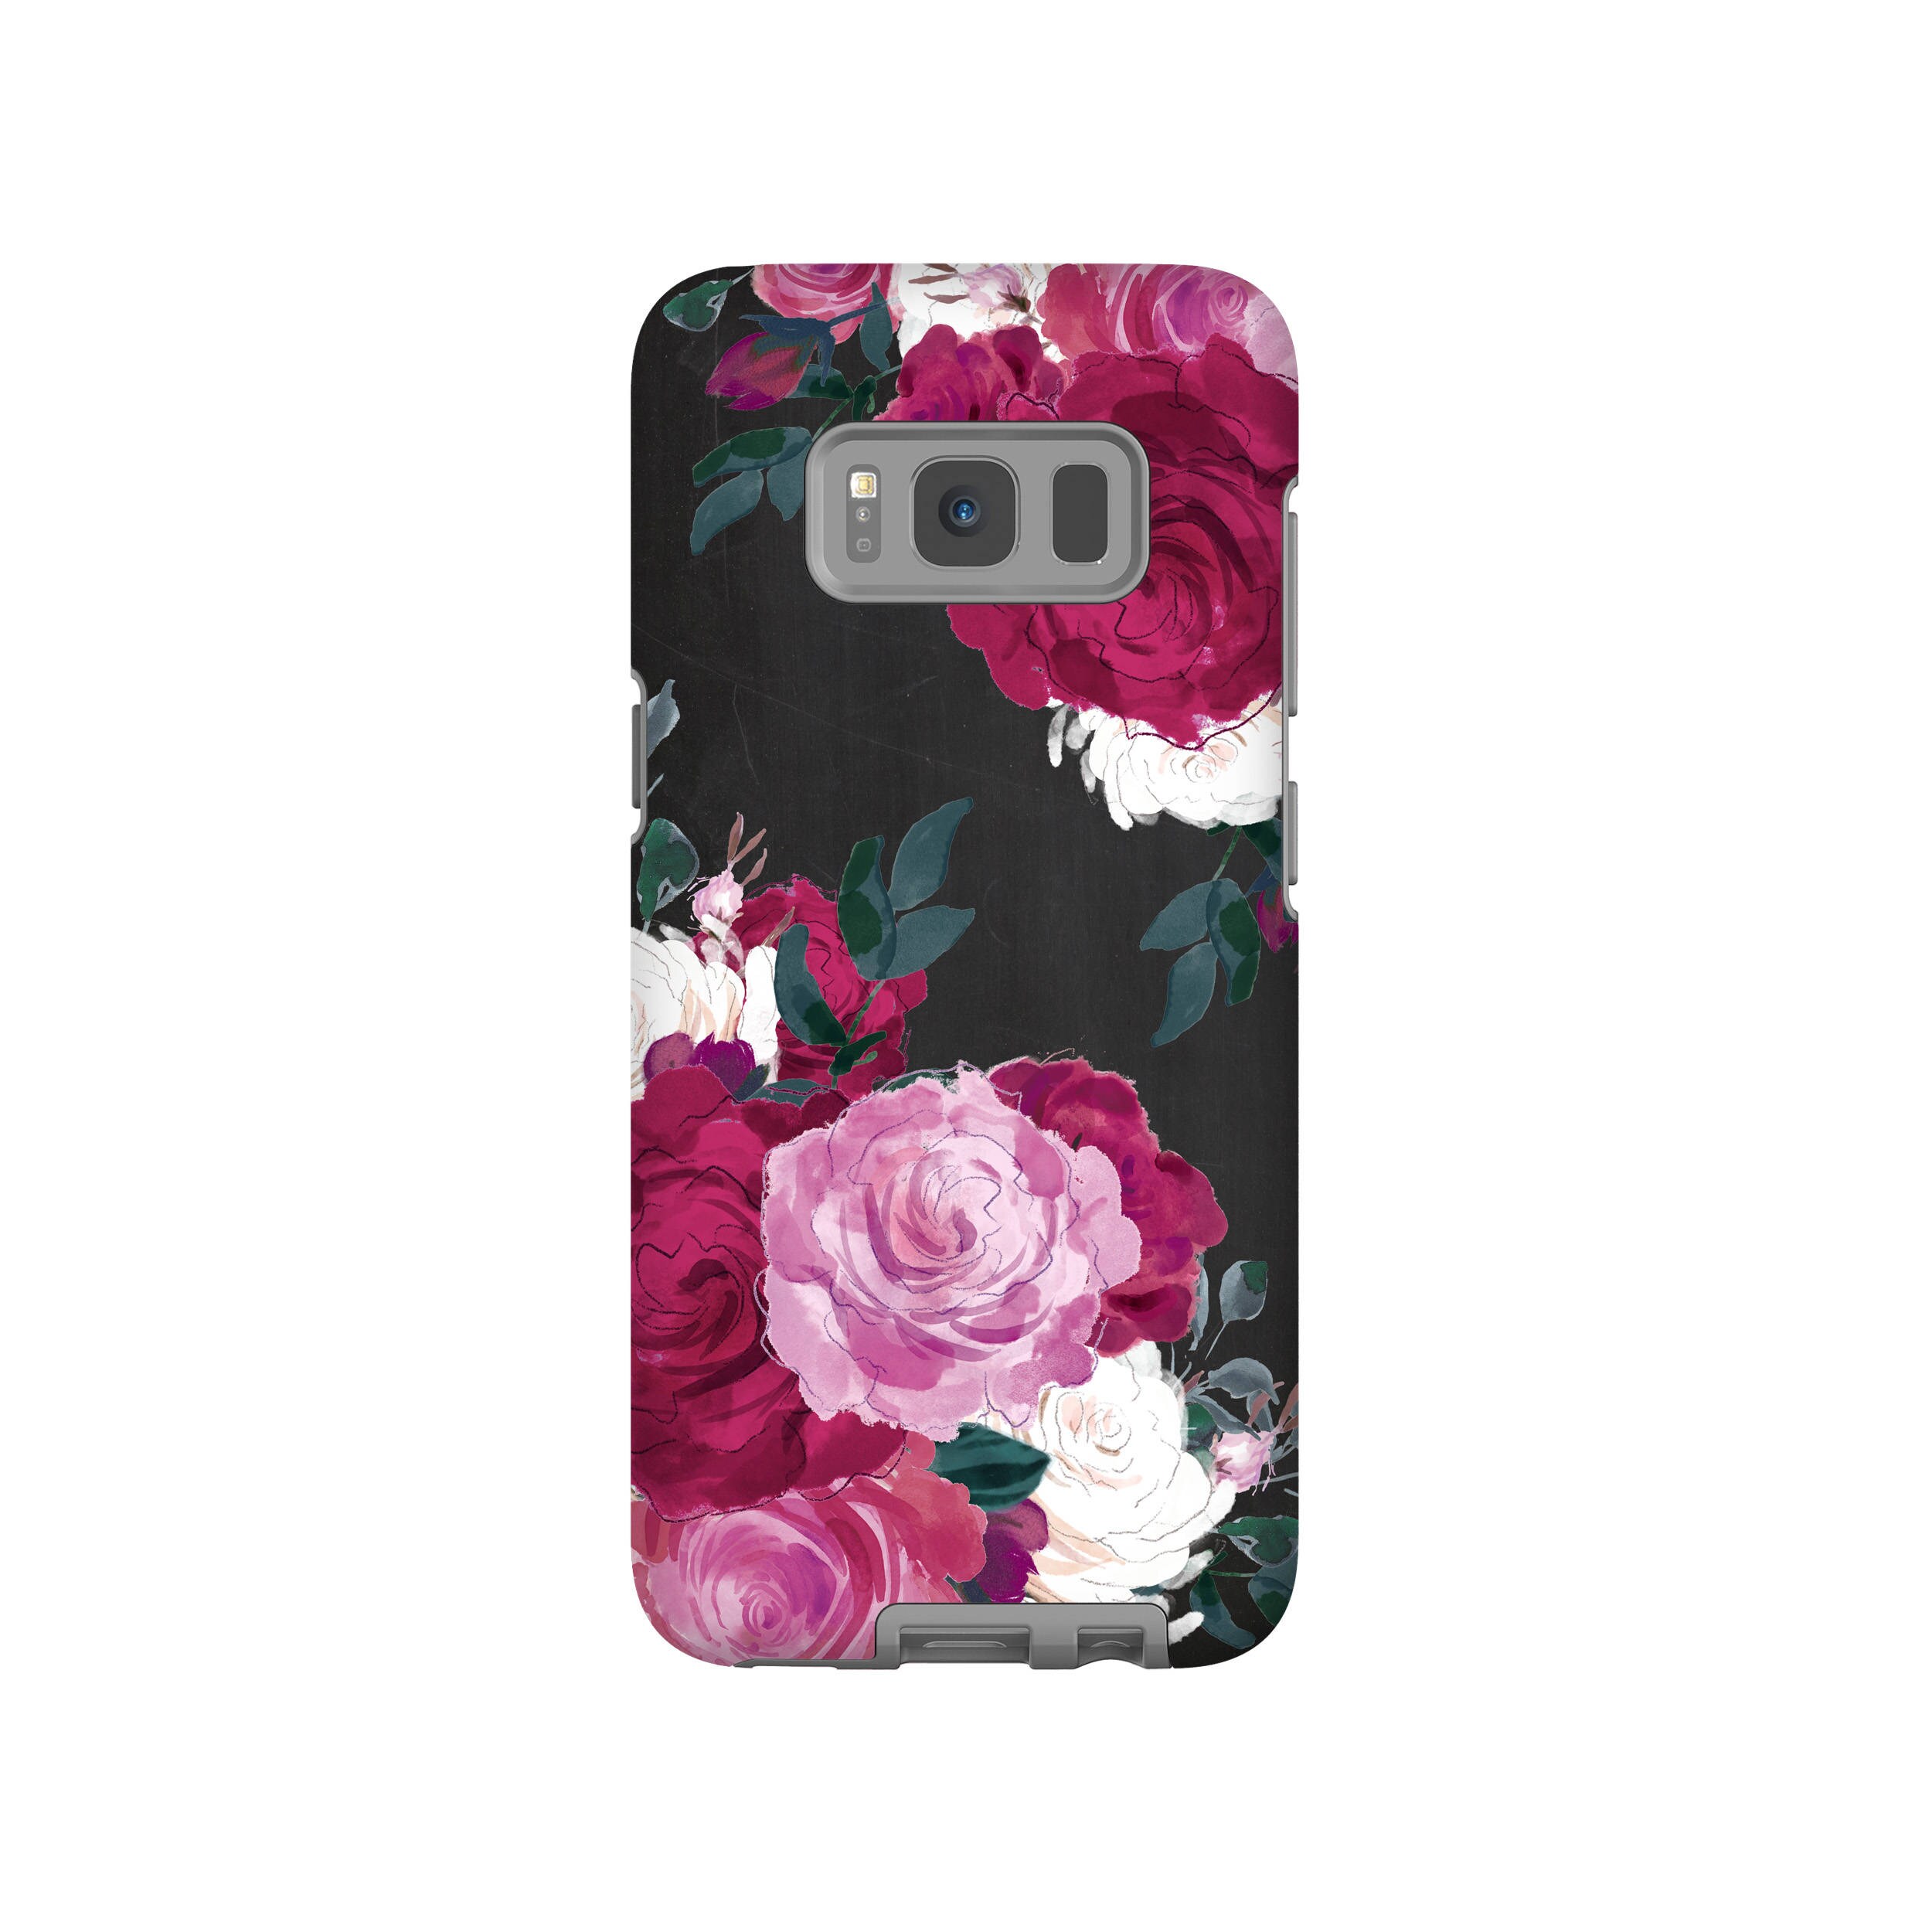 Rose Phone Case Pretty Floral Girly Iphone 6 7 8 Case - Etsy